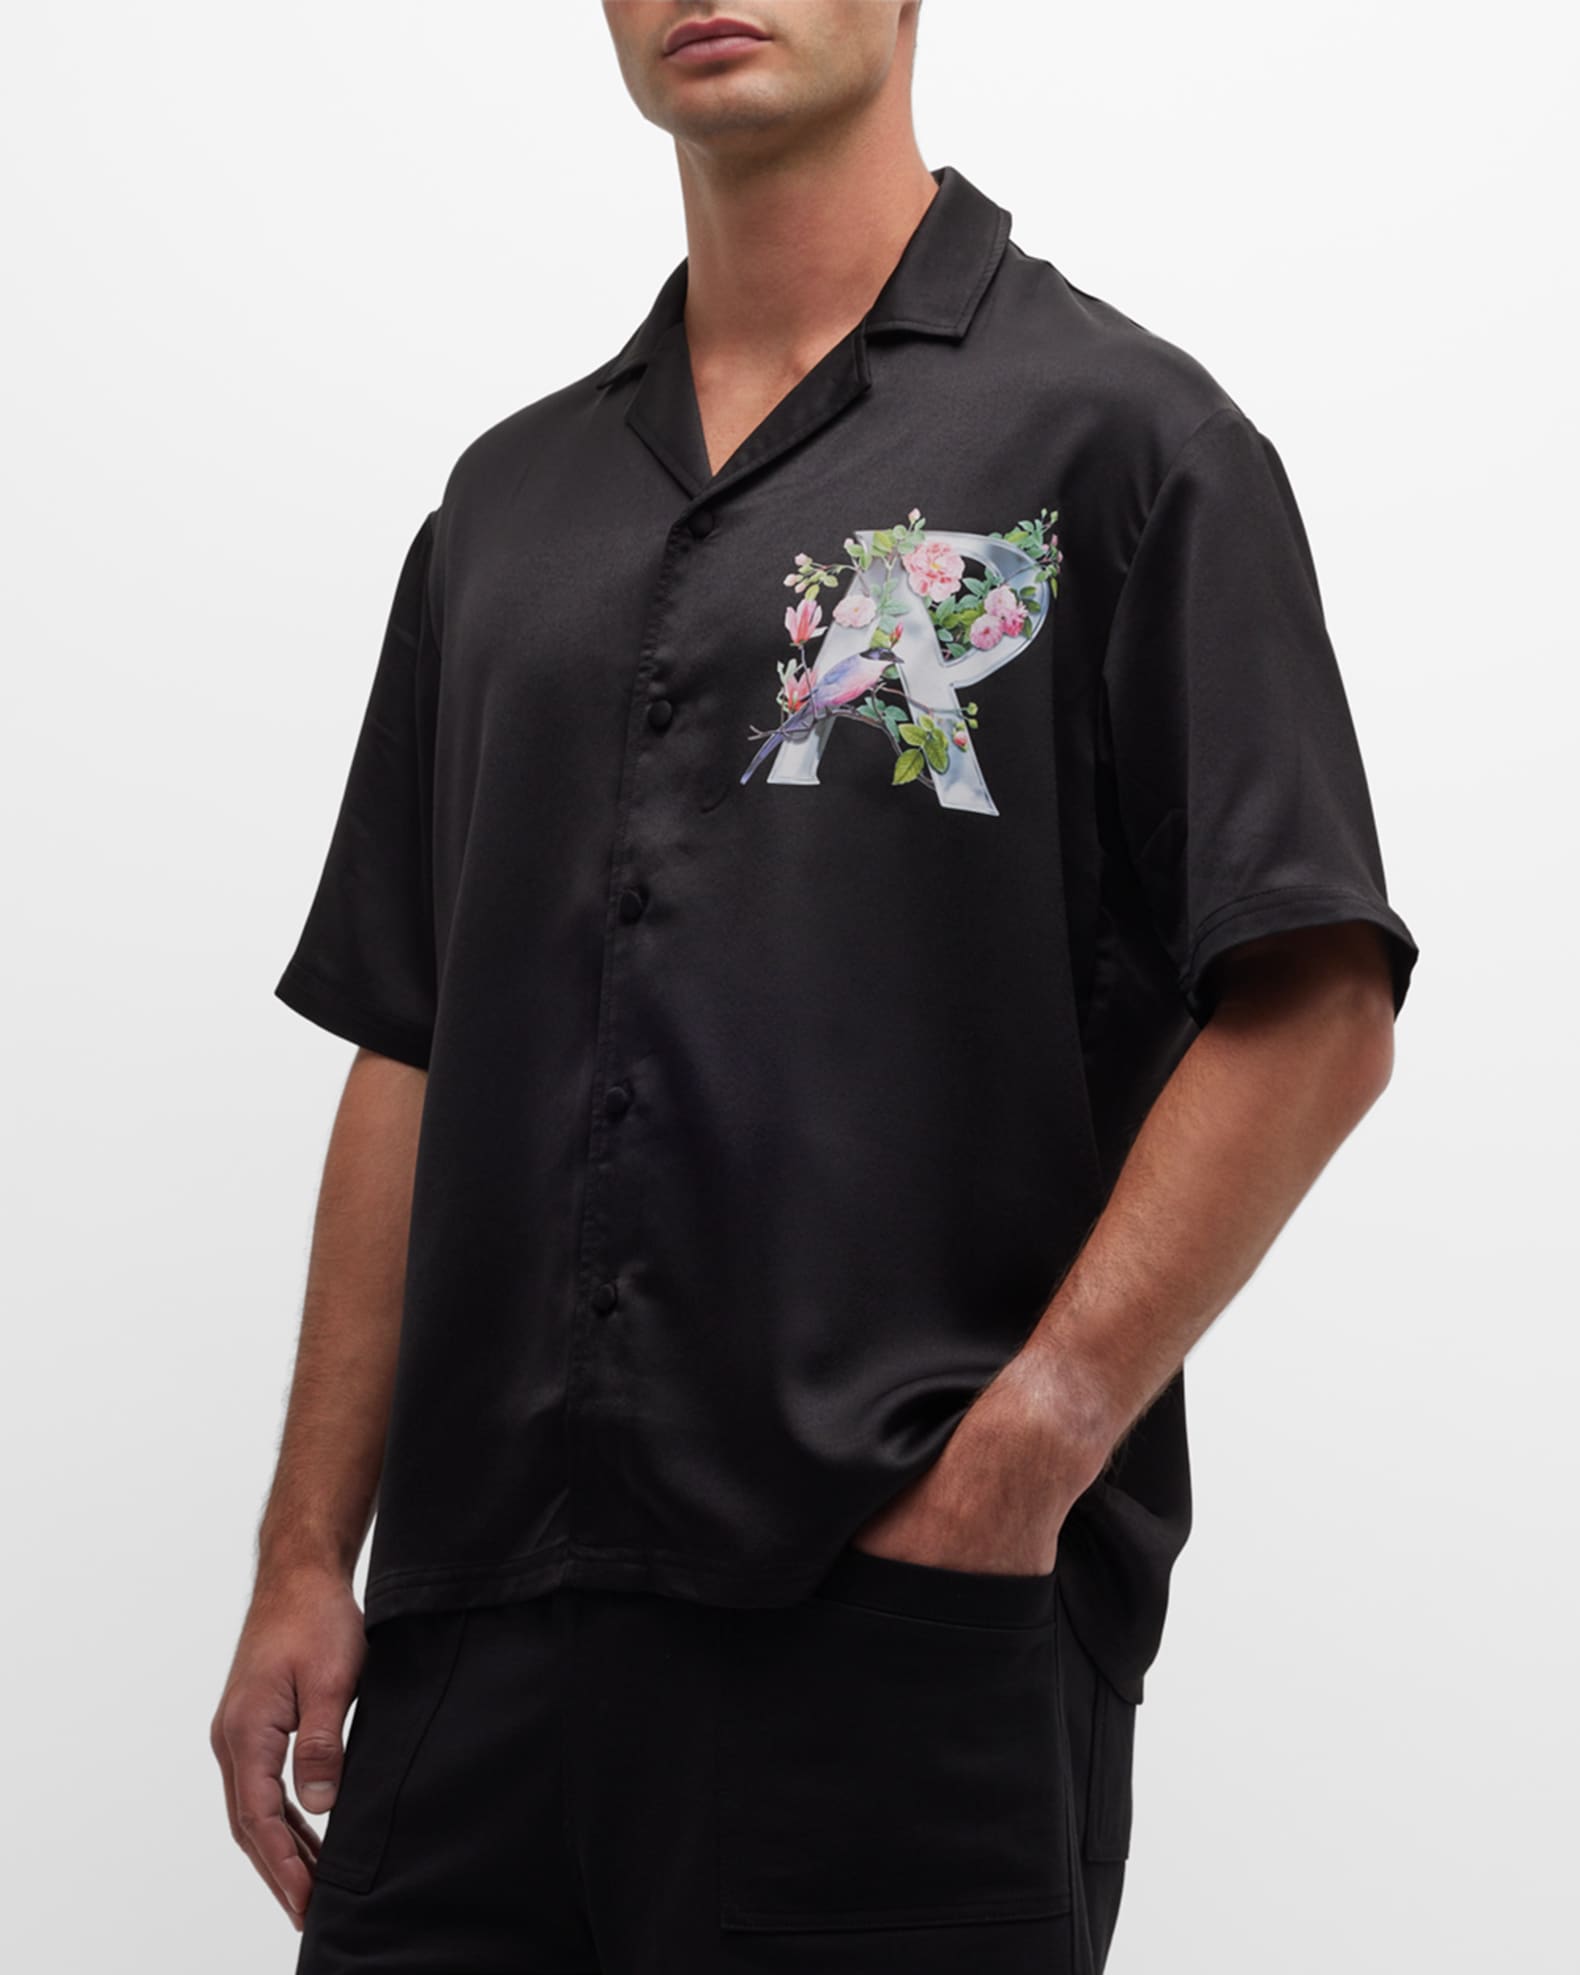 Prada unveils a limited-edition bowling shirt for its May Time